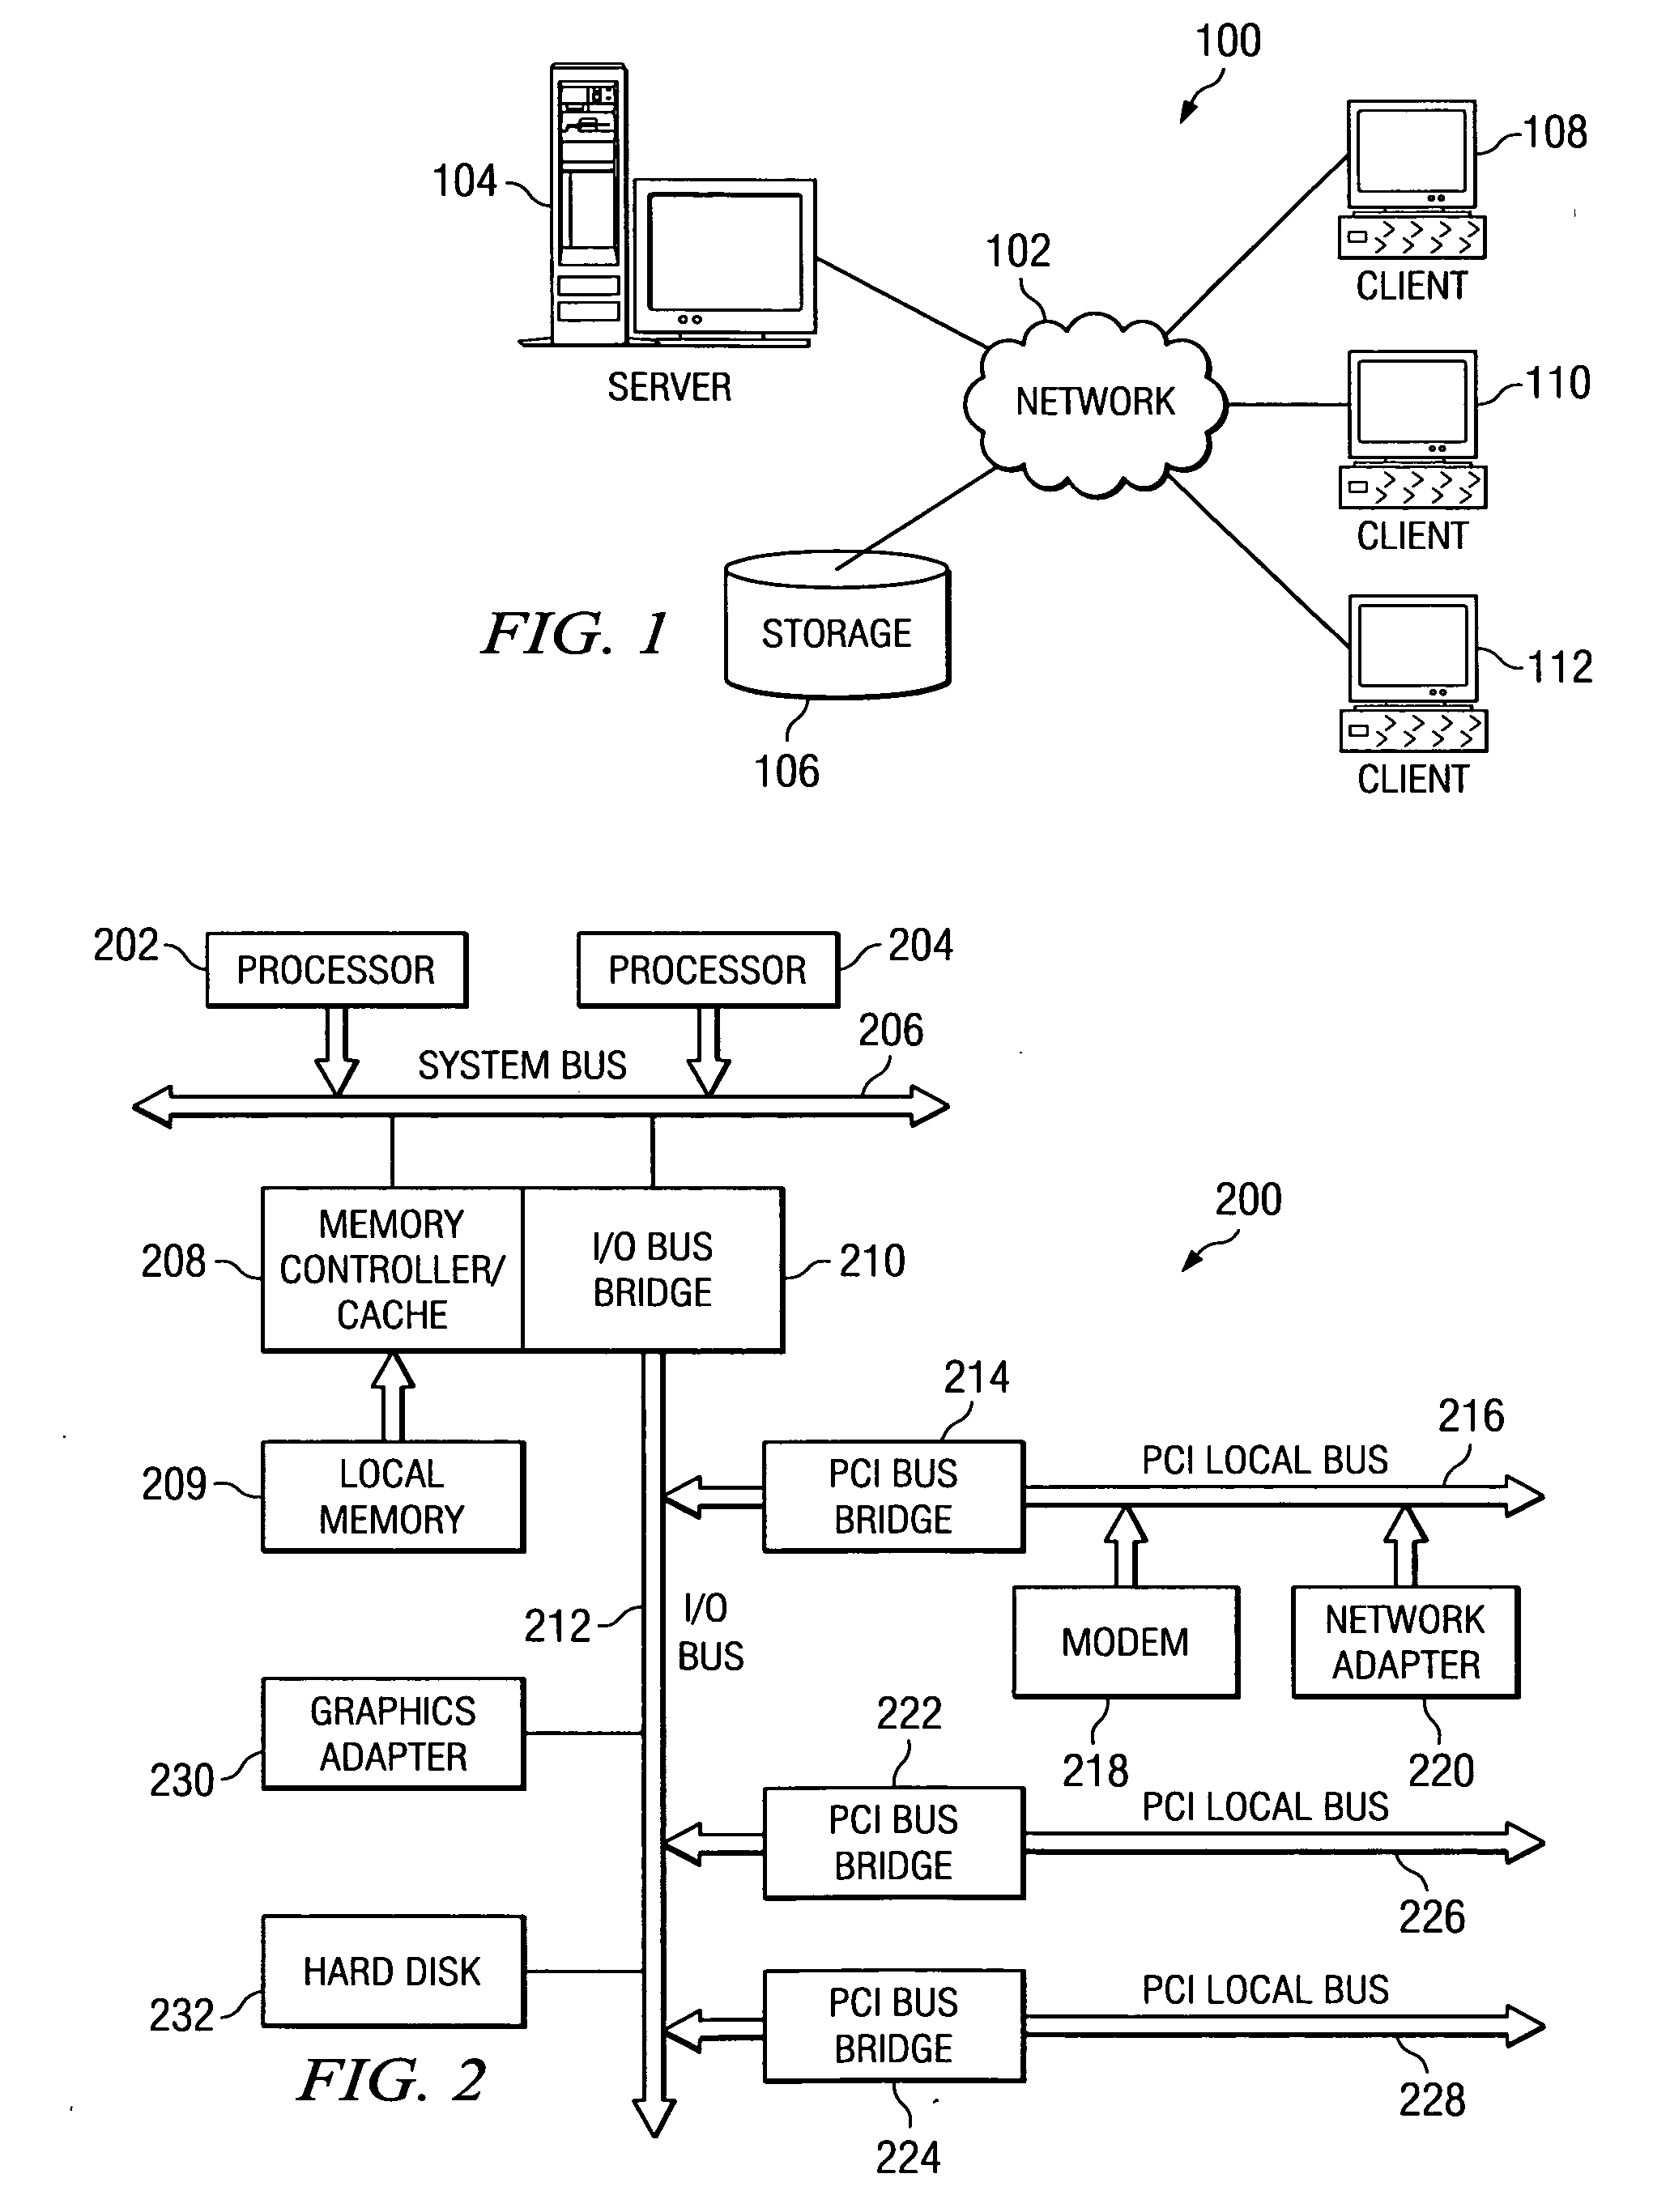 Method for monitoring and reporting usage of non-hypertext markup language e-mail campaigns